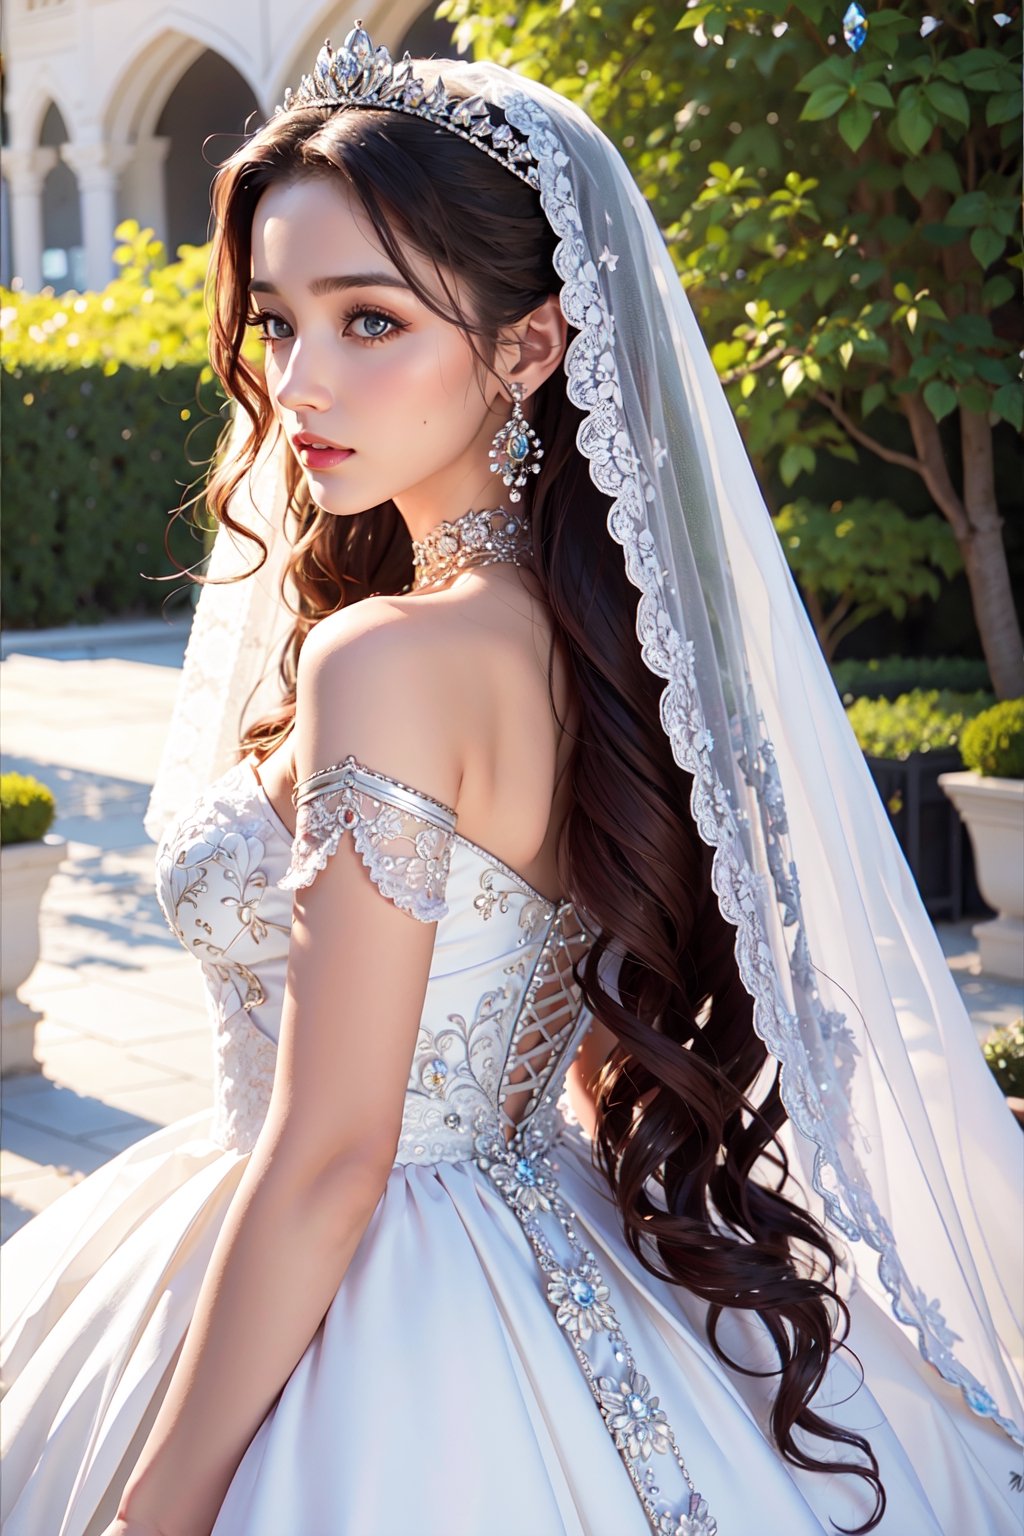 8k, RAW photo, best quality, official art, aesthetic, 1girl, long_hair, top teen model, Beautiful Arabian woman, 25 years old, detailed background, wedding_band, wedding party, elegant,  silver-white wedding dress, crystals embroidery, Wearing a gorgeous crystal tiara, Realism, wedding dress, natural makeup, garden wedding,facing_viewer, front_view, flowers